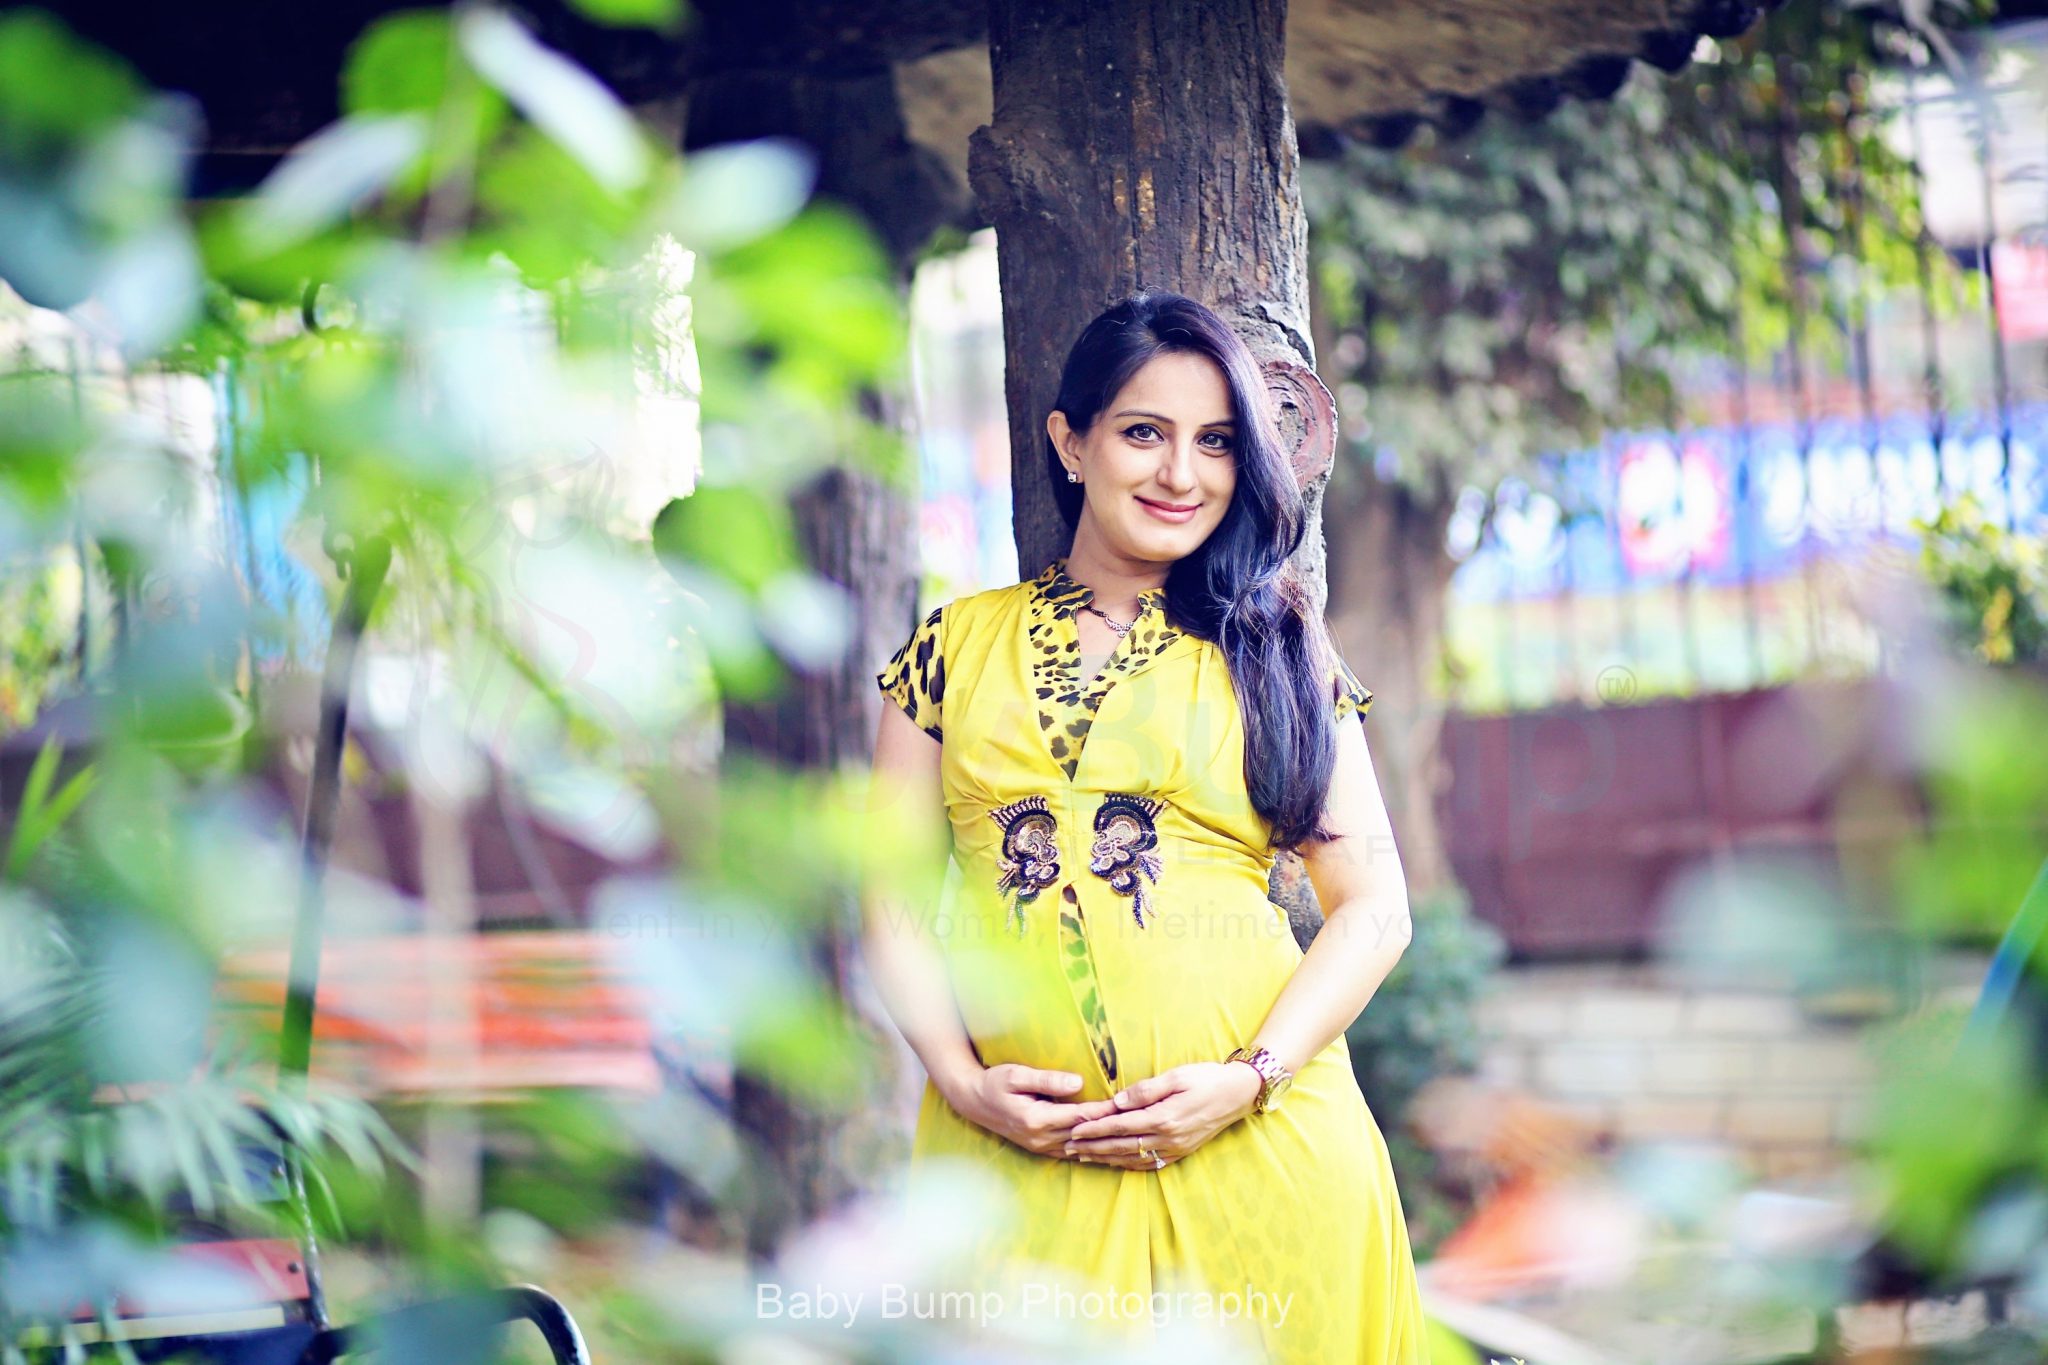 Baby Bump Photography Service at best price in Ahmedabad